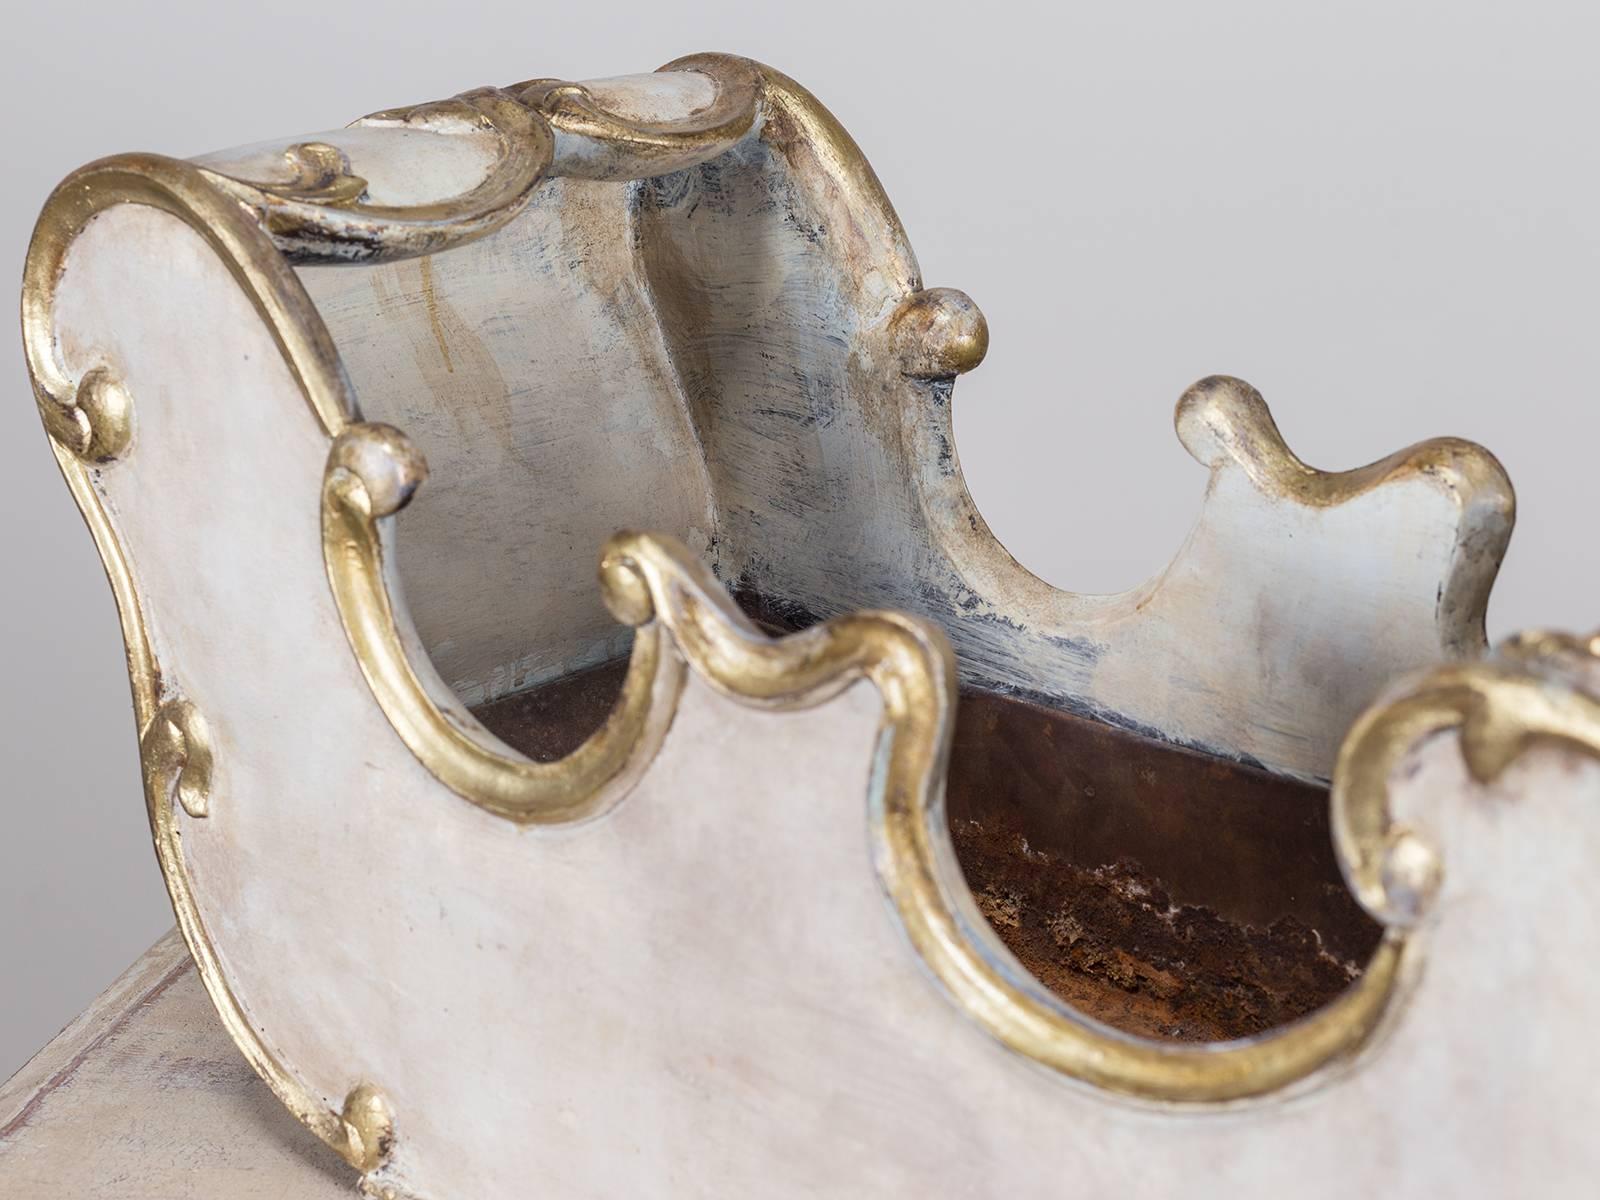 This charming vintage French plant holder circa 1940 in the shape of a sleigh has a painted and gilded finish that conceals a liner for potted plants. In the Rococo style with scrolls and flourishes this unusual carved wood container is perfect for